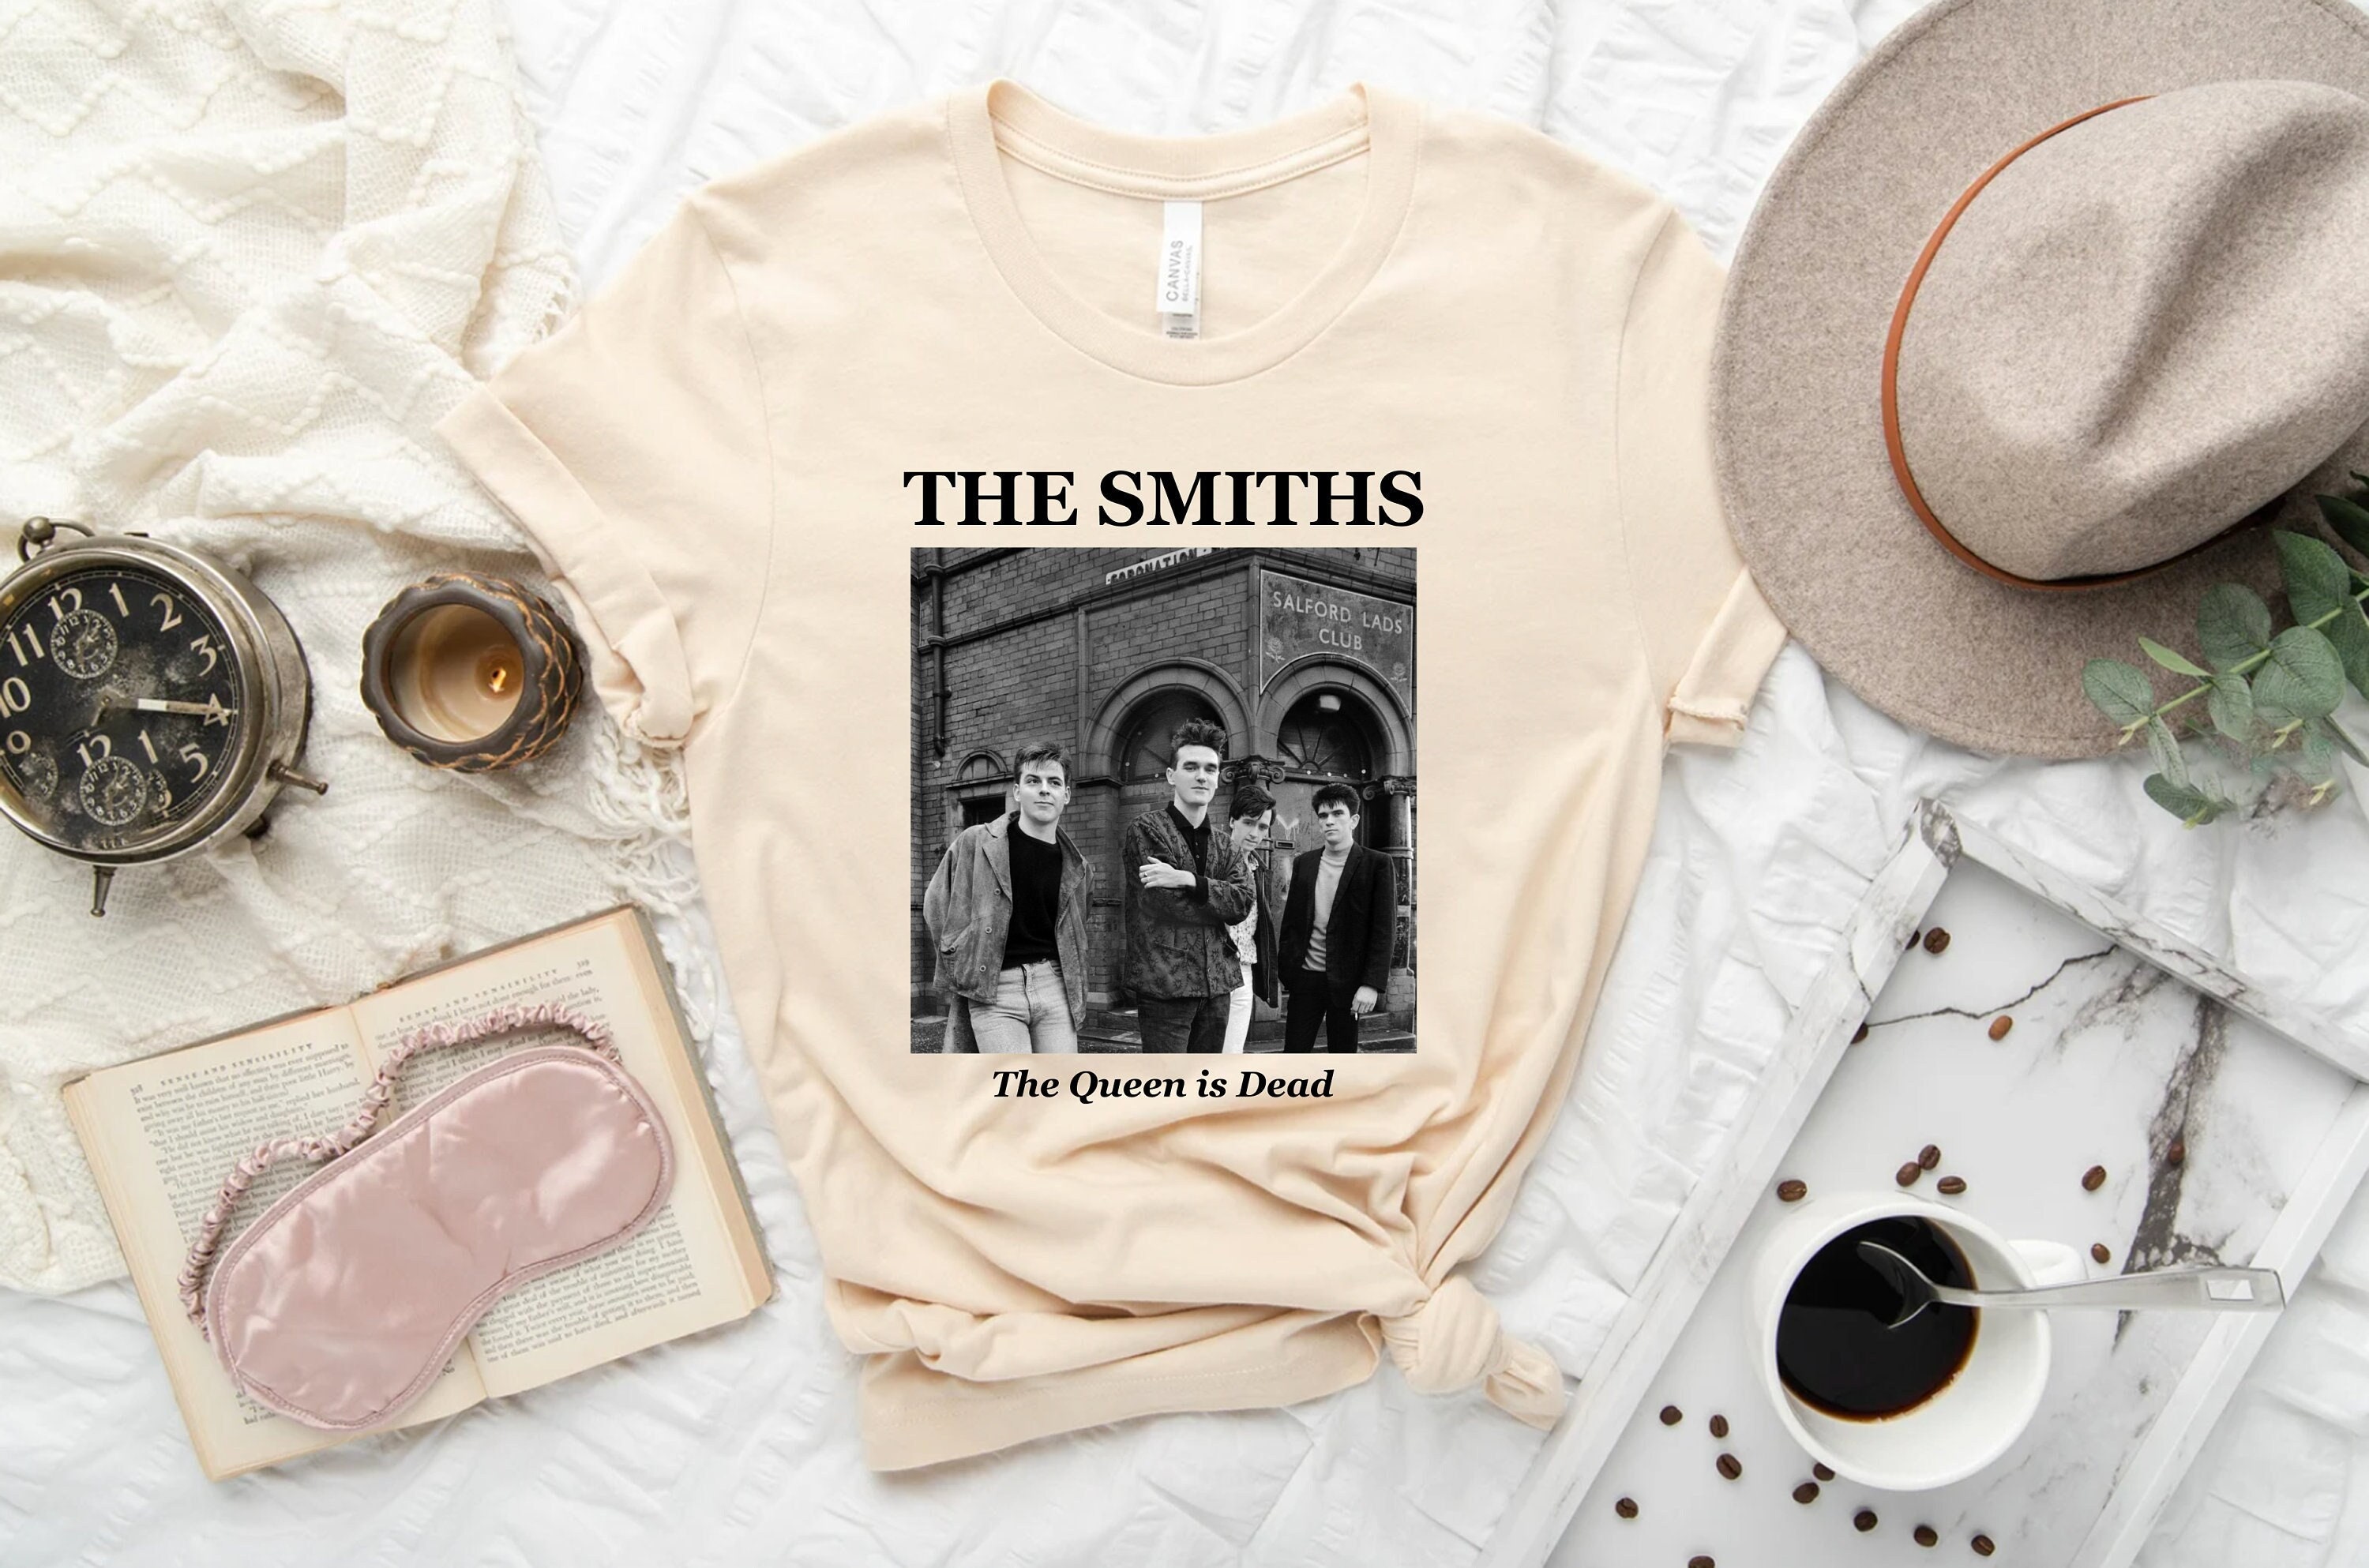 Discover The Smiths Shirt, The Smiths The Queen is Dead T-shirt